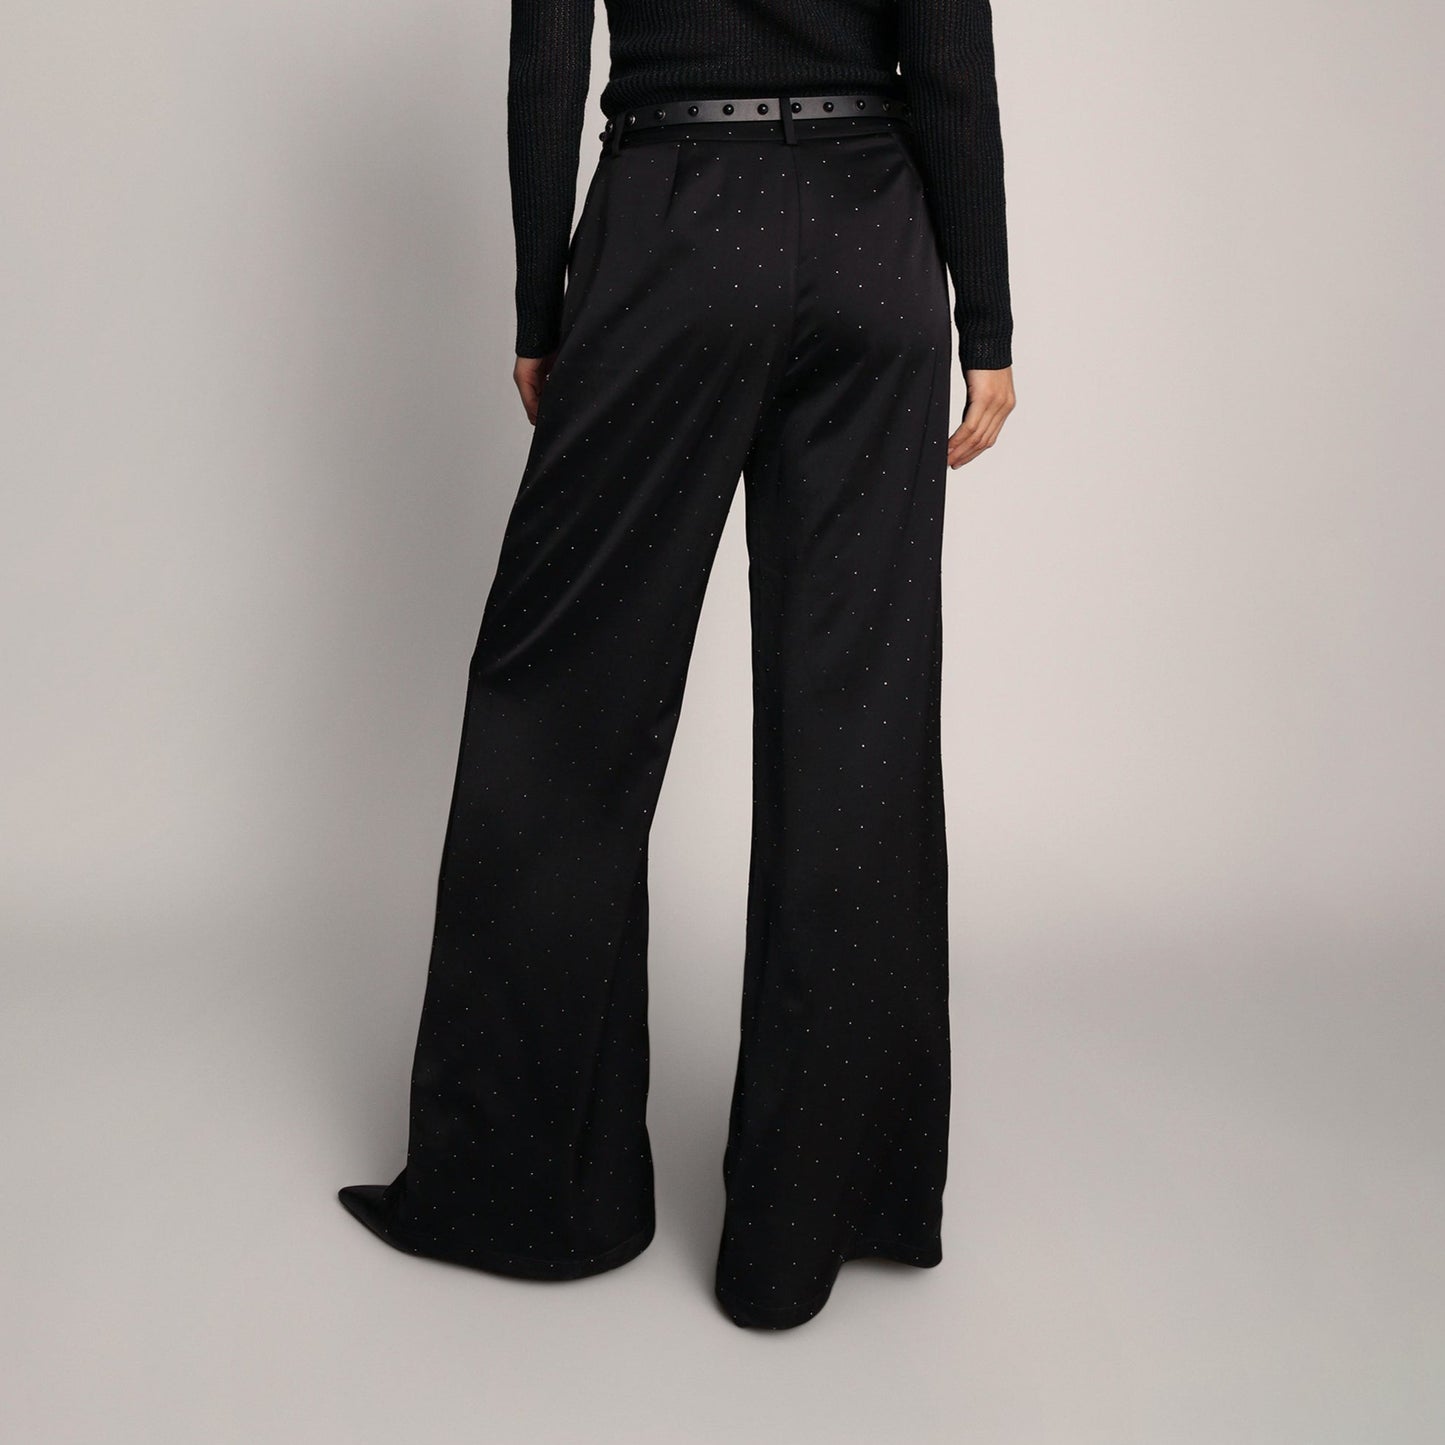 Leileen Sparkle Pant in Black